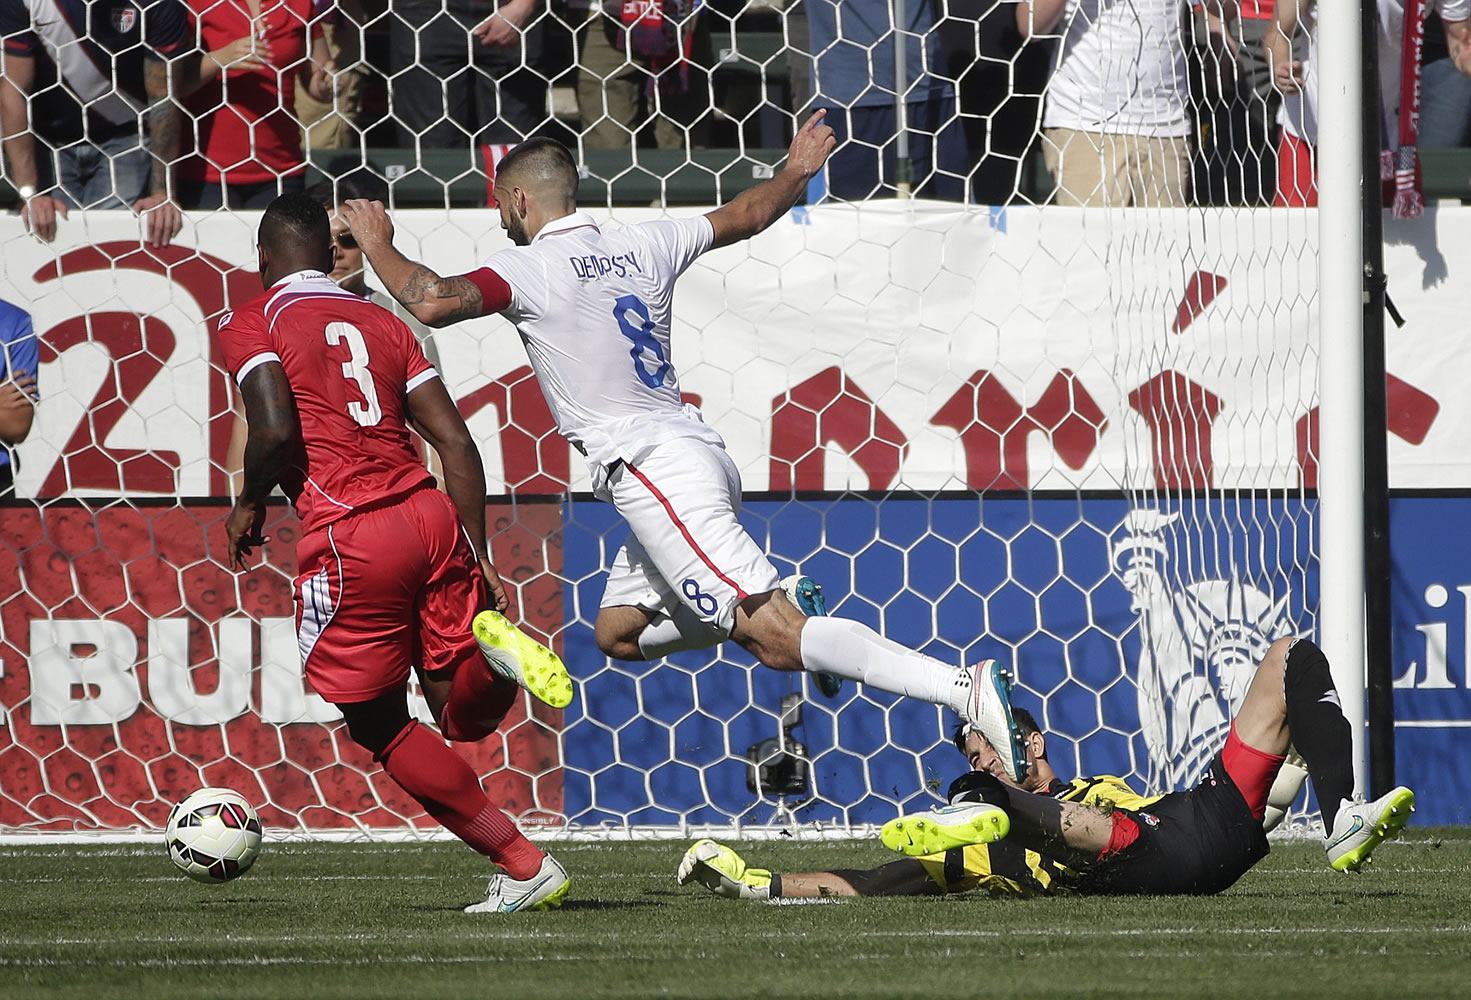 United States' Clint Dempsey, center, moves the ball past Panama goalie Jaime Penedo, right, to score during the first half of a friendly soccer match, Sunday, Feb. 8, 2015, in Carson, Calif. (AP Photo/Jae C.